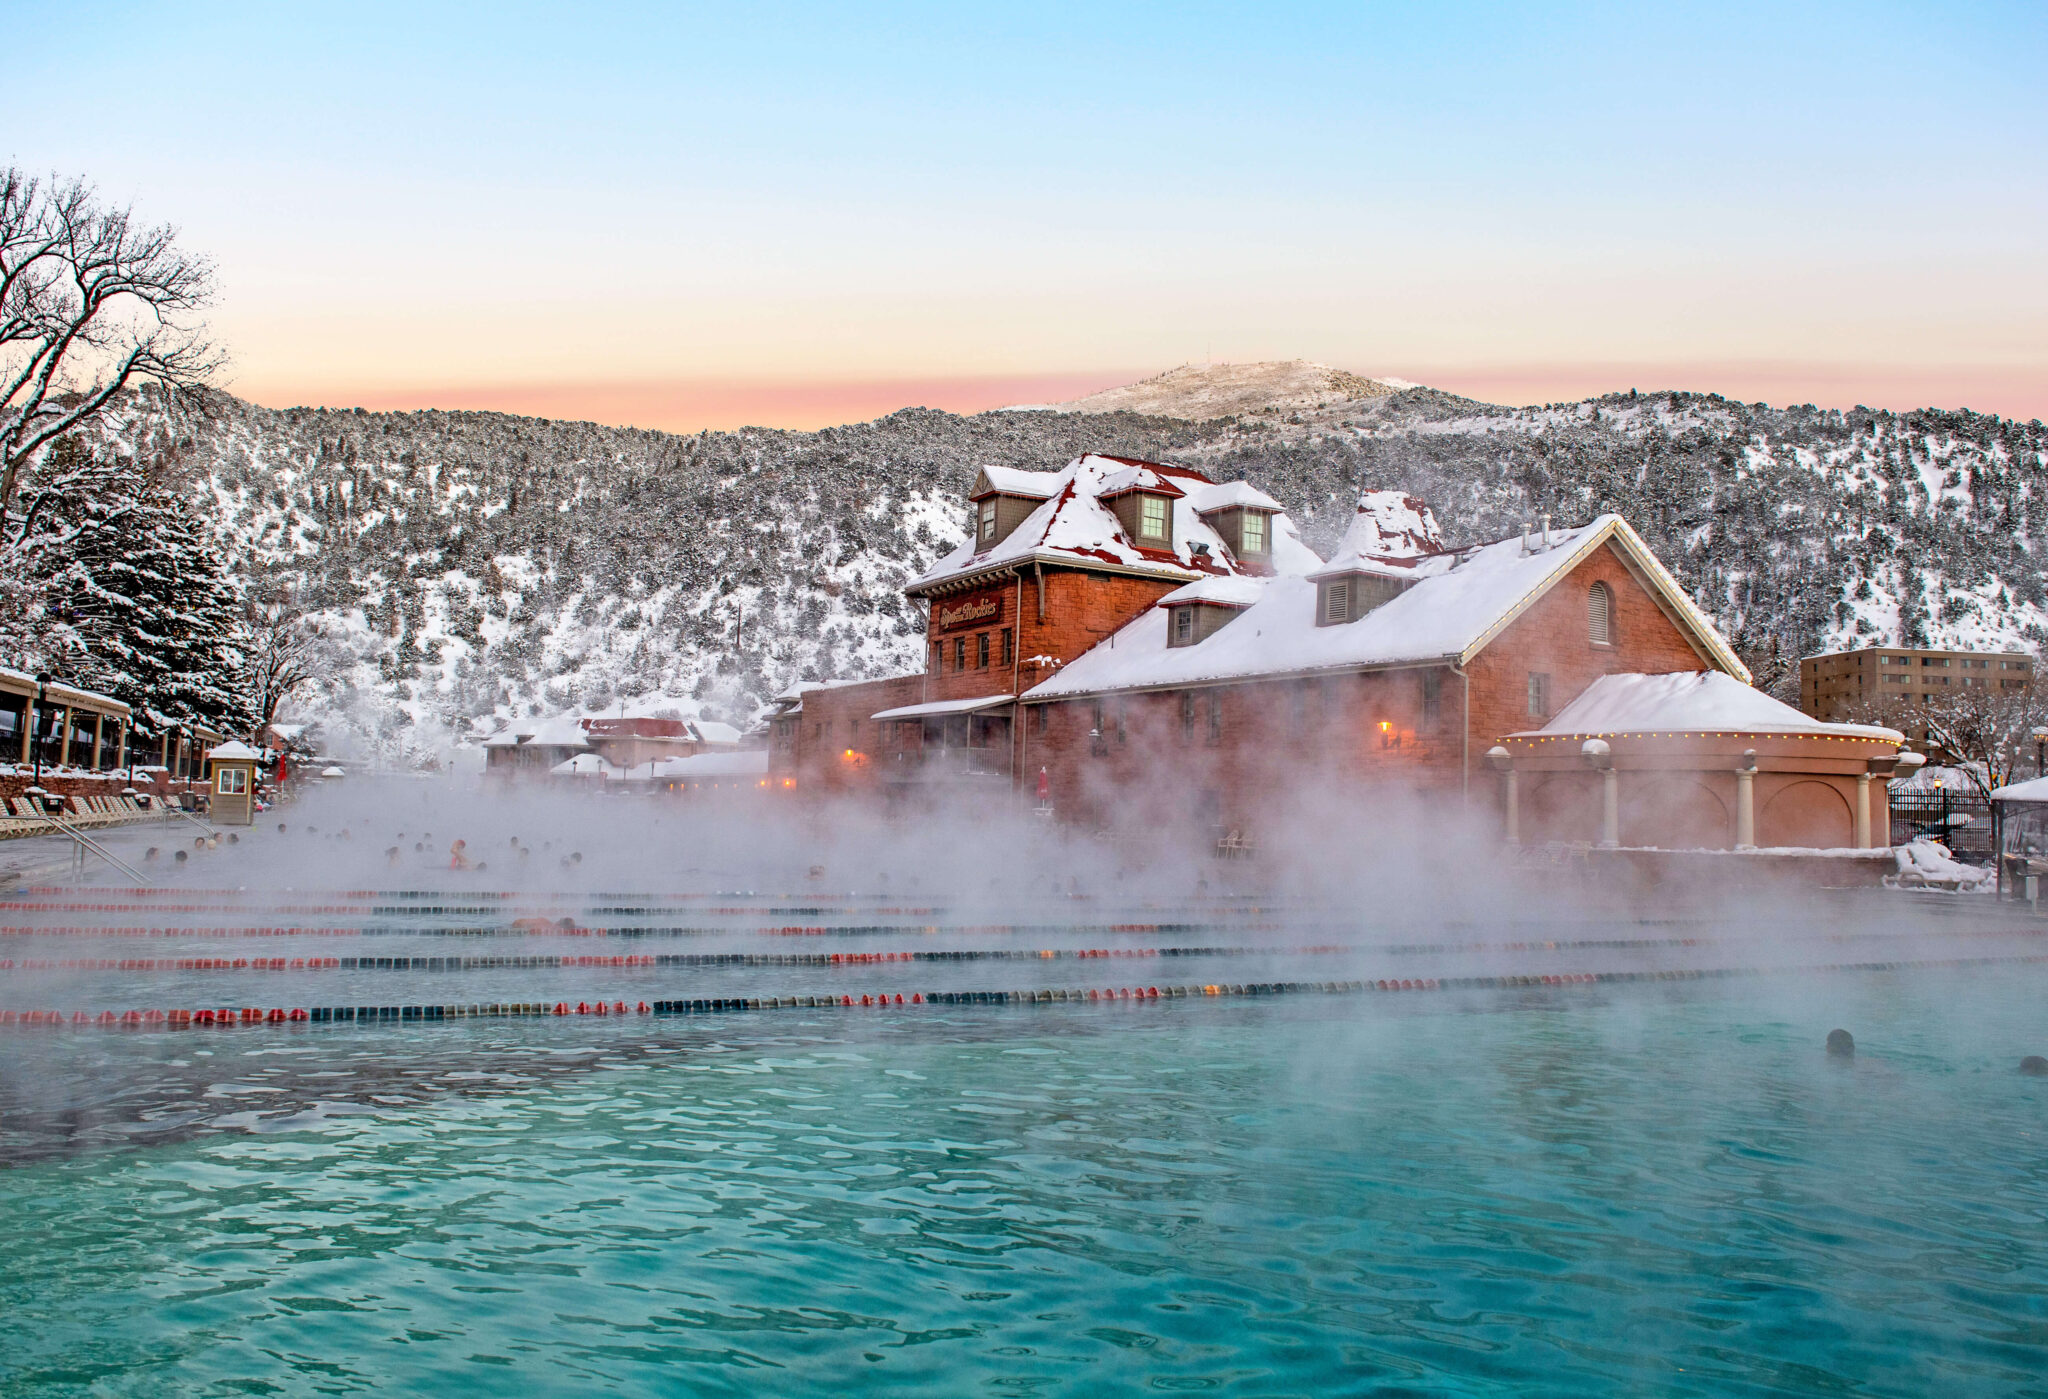 In this captivating photo, immerse yourself in the winter beauty of Glenwood Hot Springs pool from a unique poolside perspective. Situated within the pool, gaze at the snow-covered mountains, and witness the rising steam from the warm mineral waters. The scene exudes a genuine sense of peace and tranquility.